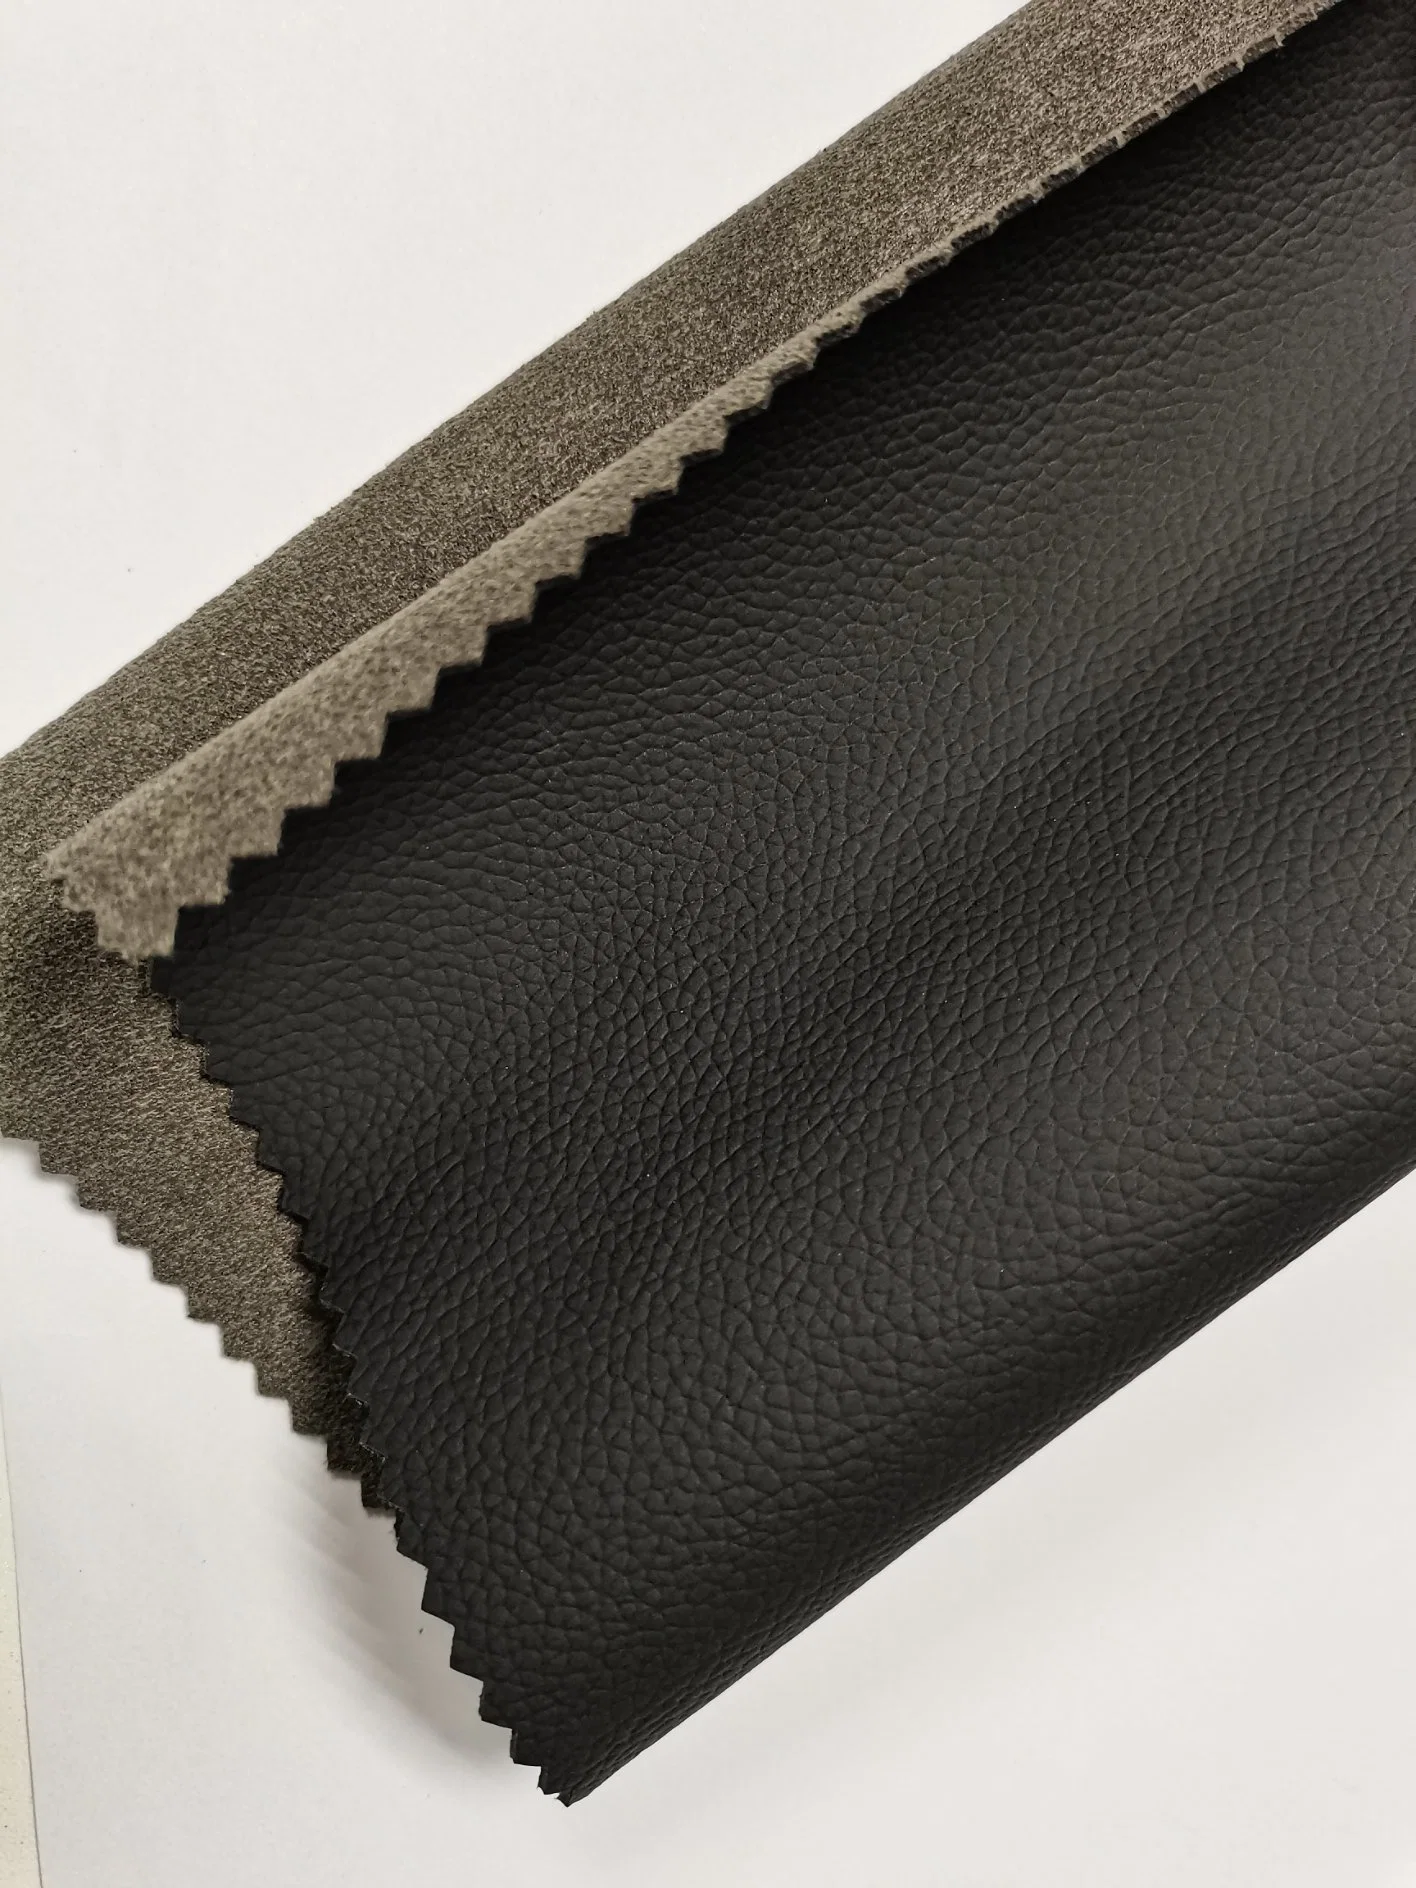 Synthetic Leather Automotive Huafon Fire Proof Synthetic Leather for Automotive, Carseat